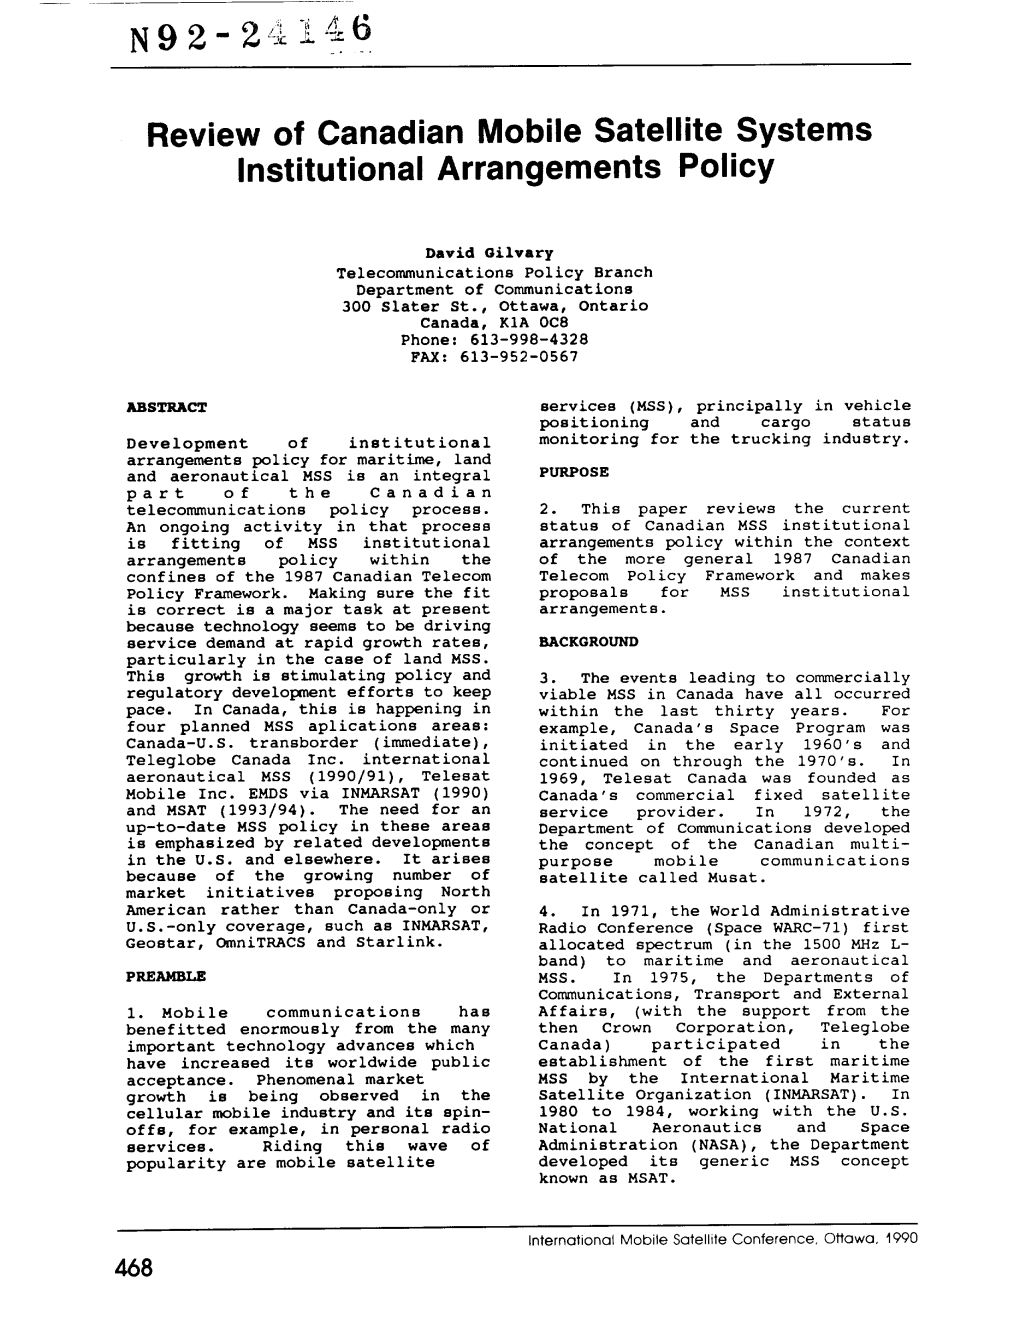 Review of Canadian Mobile Satellite Systems Institutional Arrangements Policy